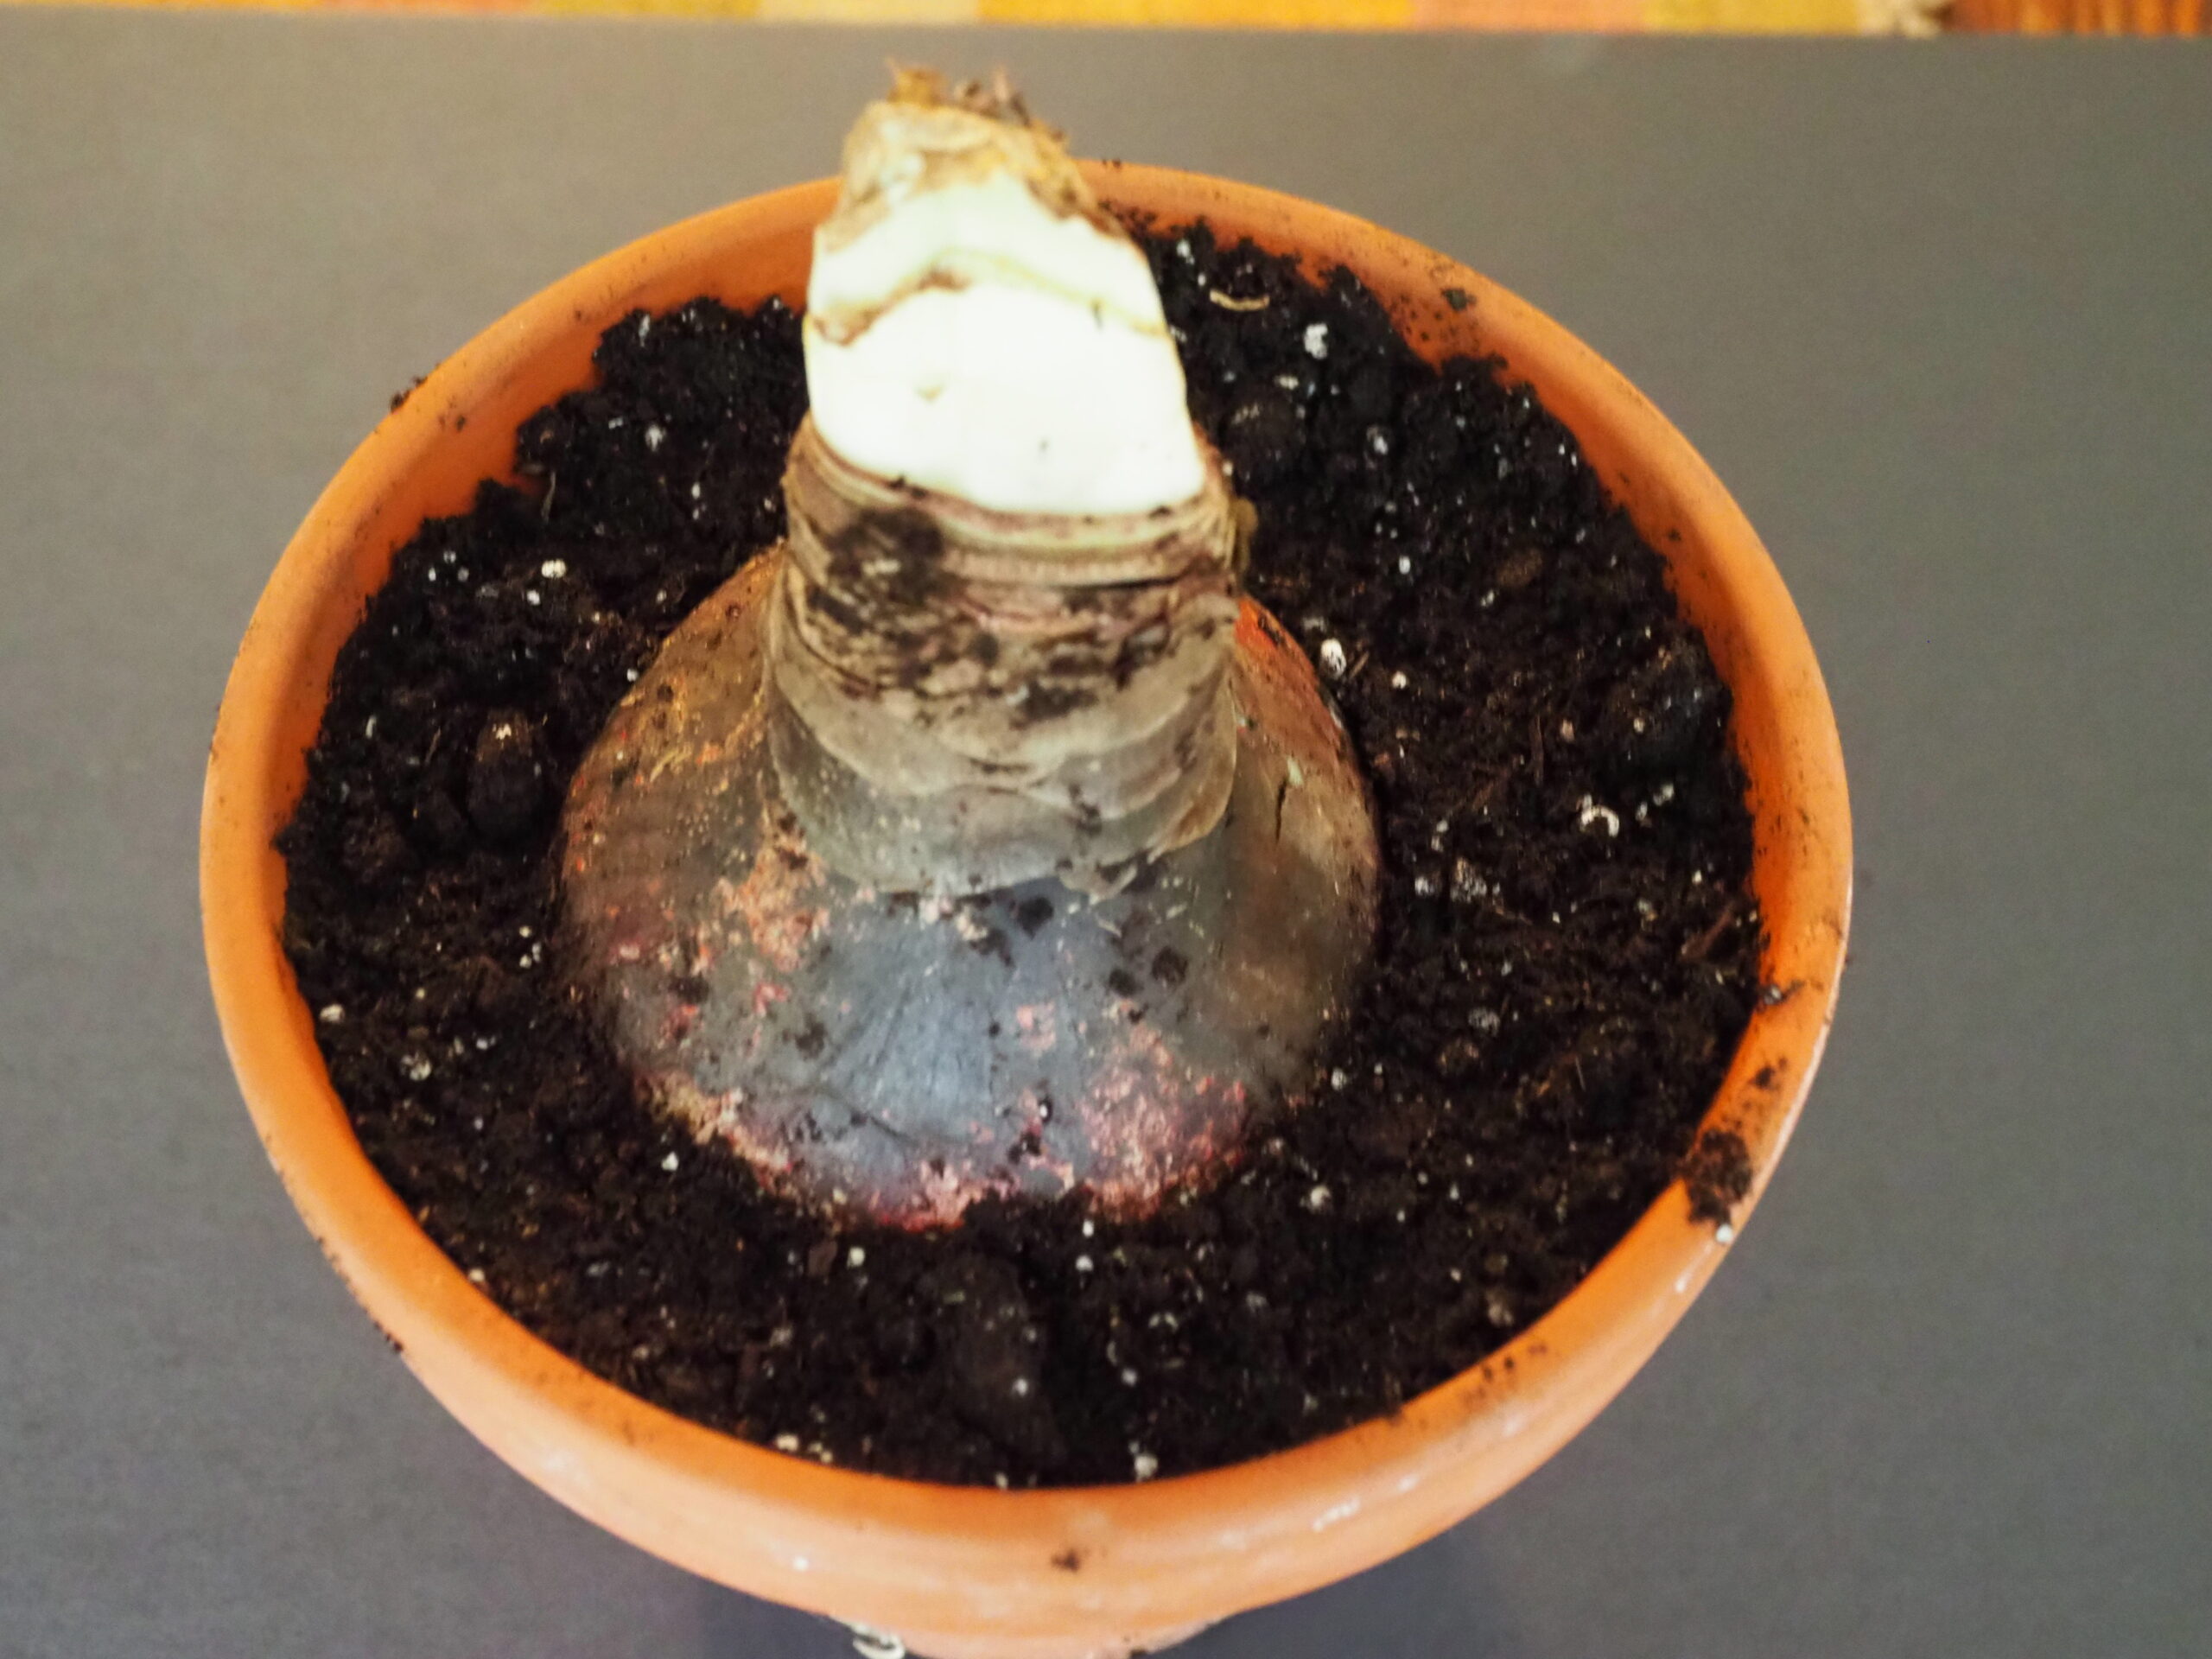 Once planted the bulb should sit with about one-third of it above the soil. The soil should also be about a half inch below the rim of the pot. The dark color of the soil indicates that it’s be moistened before put in the pot. ANDREW MESSINGER